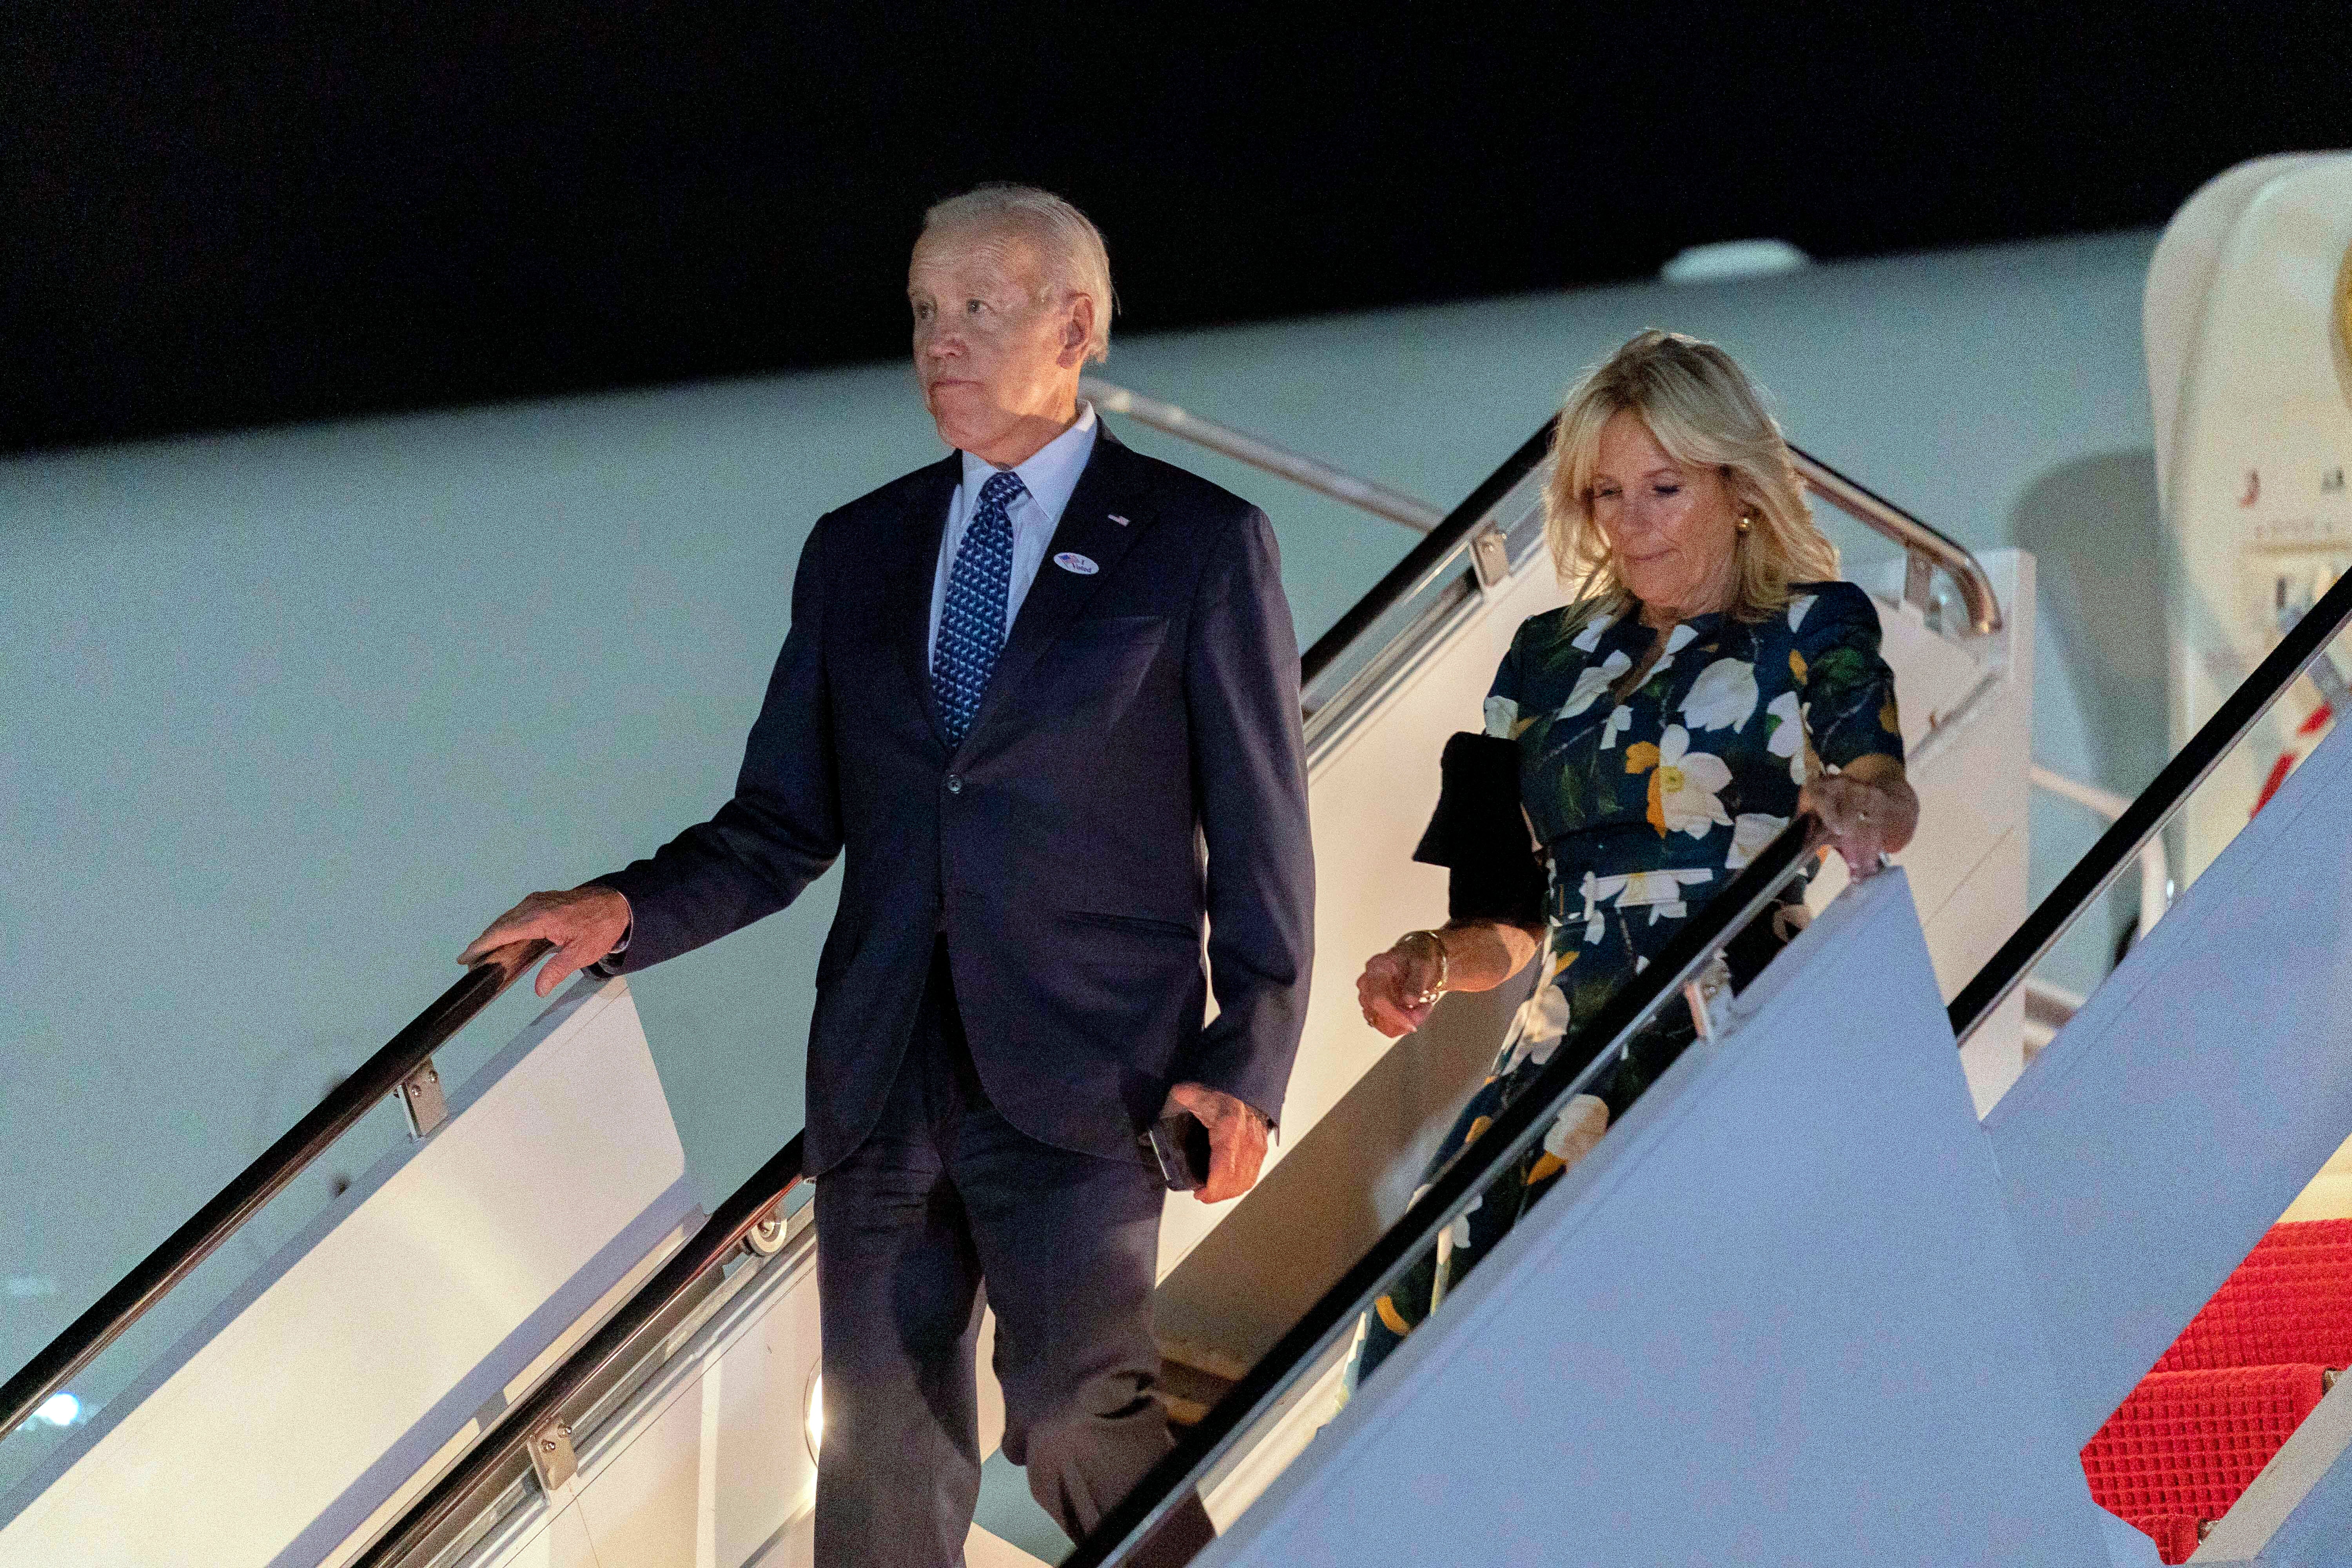 President Joe Biden and first lady Jill Biden arrive at Andrews Air Force Base, Md., Tuesday, Sept. 13, 2022, after voting in the Delaware primary.